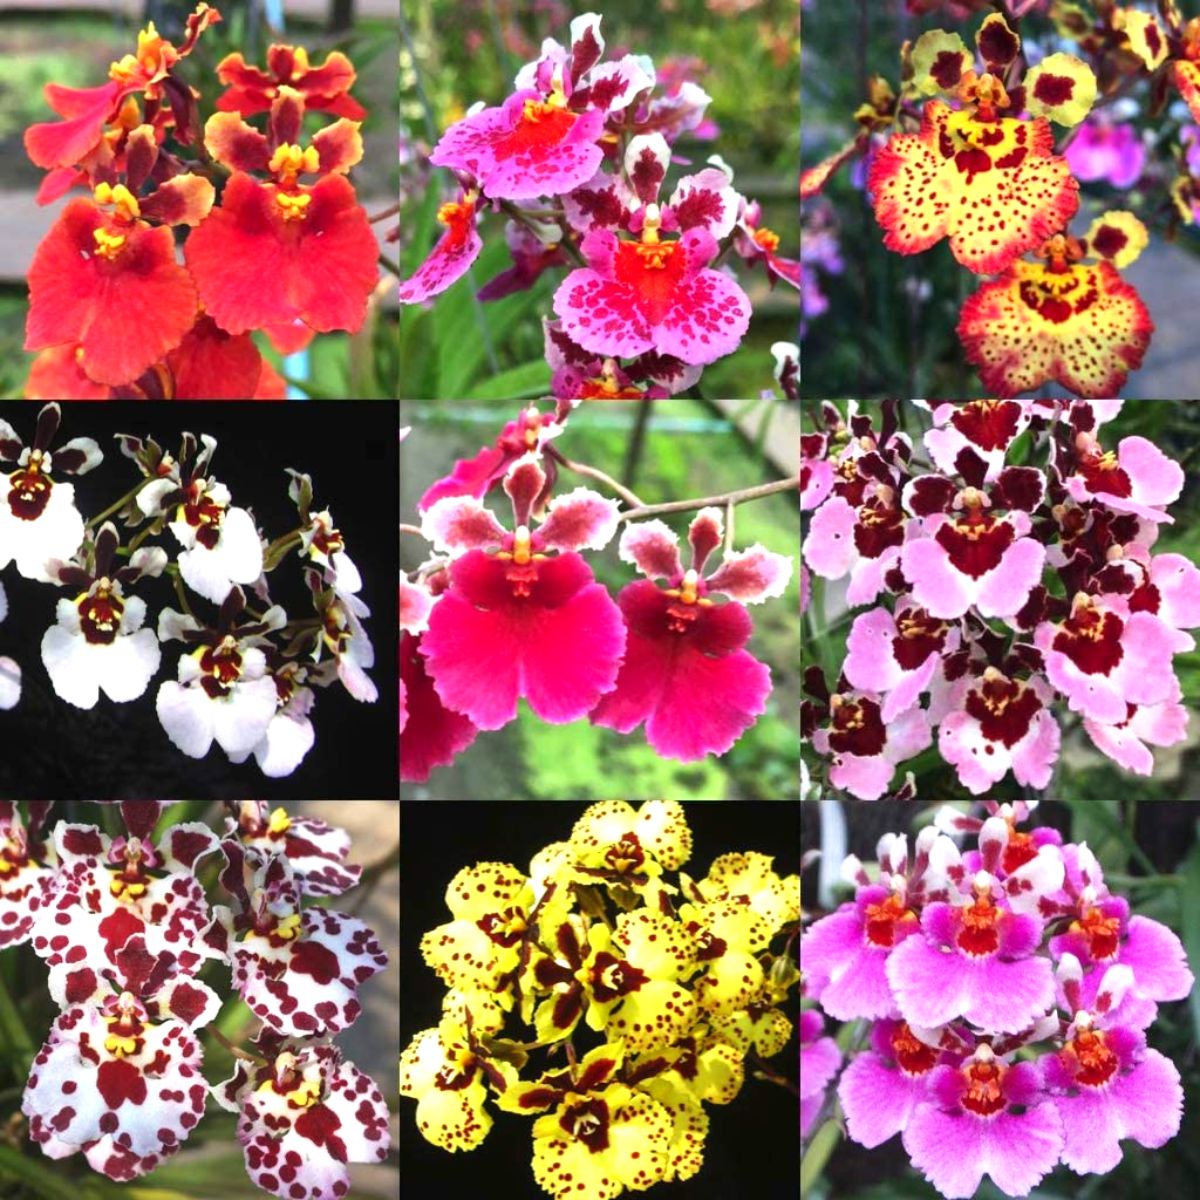 Tolumnia Rainbow orchid blooms in various vibrant colors - pink, purple, yellow, and orange.